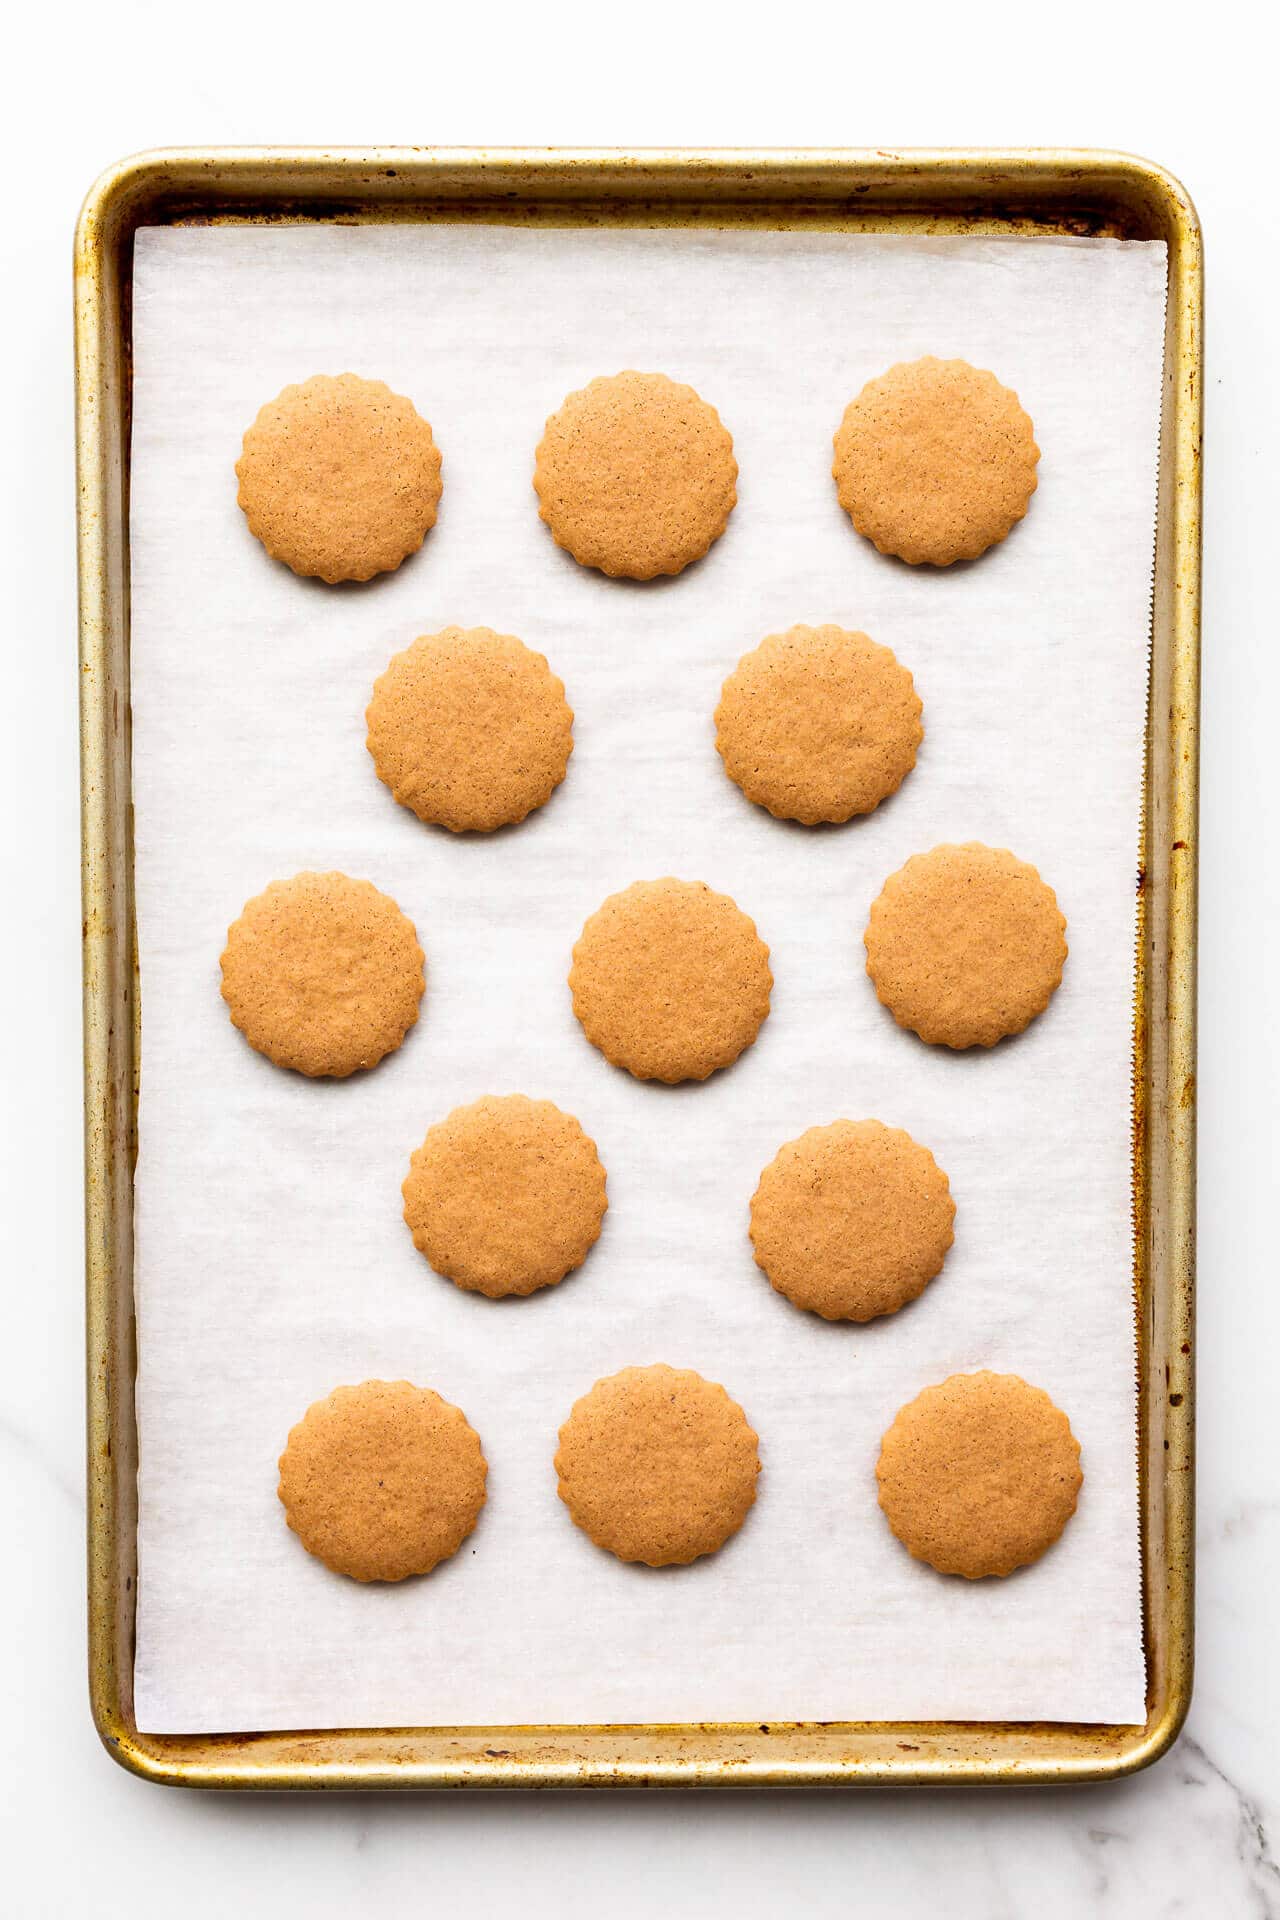 Freshly baked German gingerbread cookies on a parchment lined sheet pan.